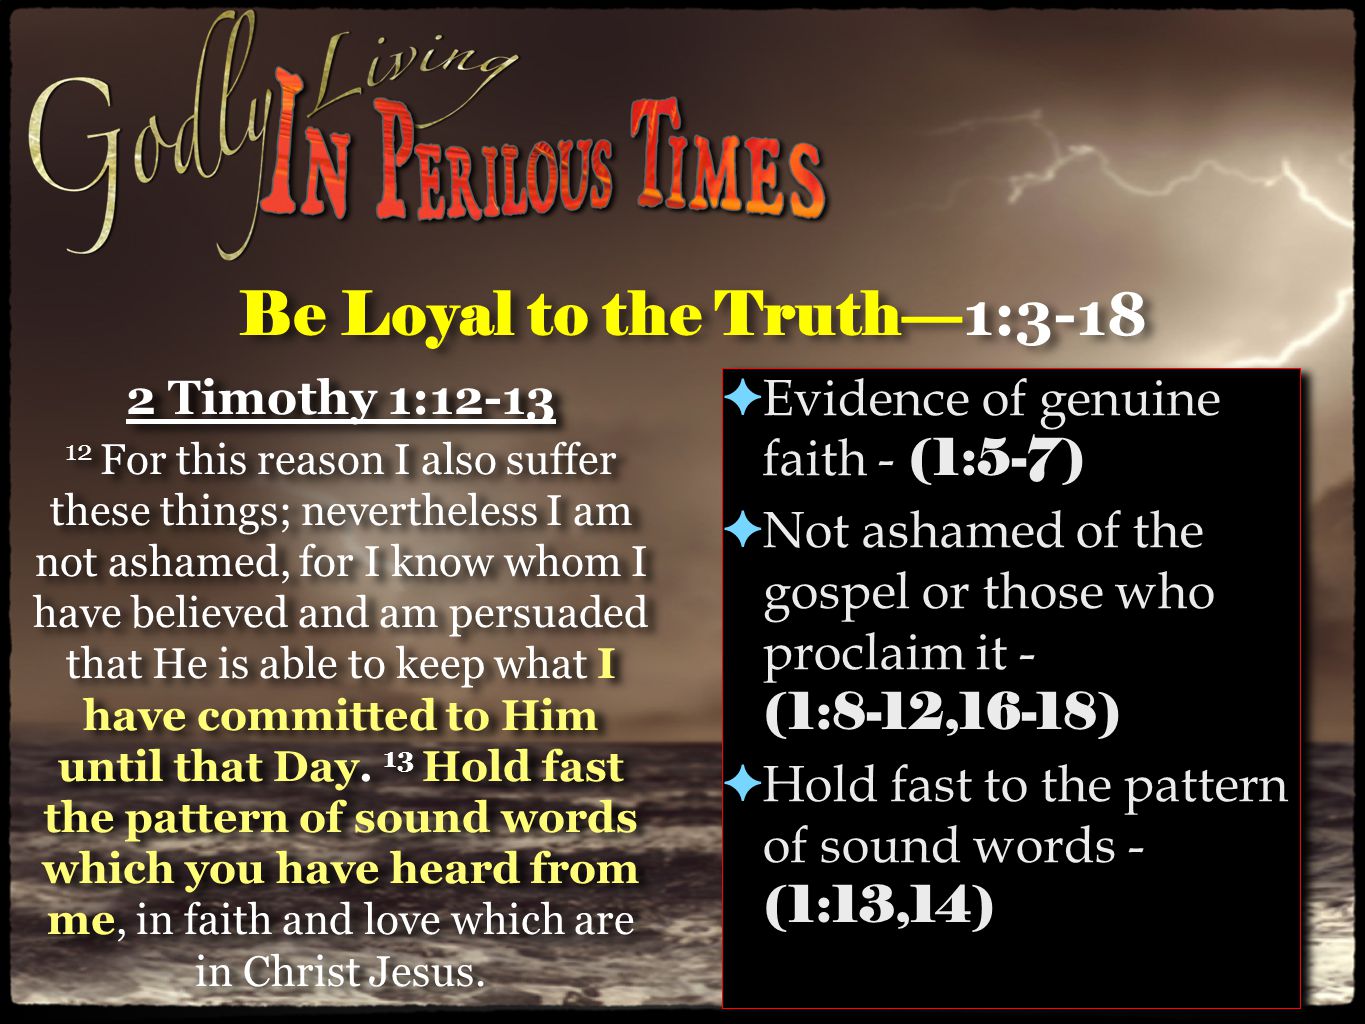 Be Loyal to the Truth— 1: Timothy 1: For this reason I also suffer these things; nevertheless I am not ashamed, for I know whom I have believed and am persuaded that He is able to keep what I have committed to Him until that Day.